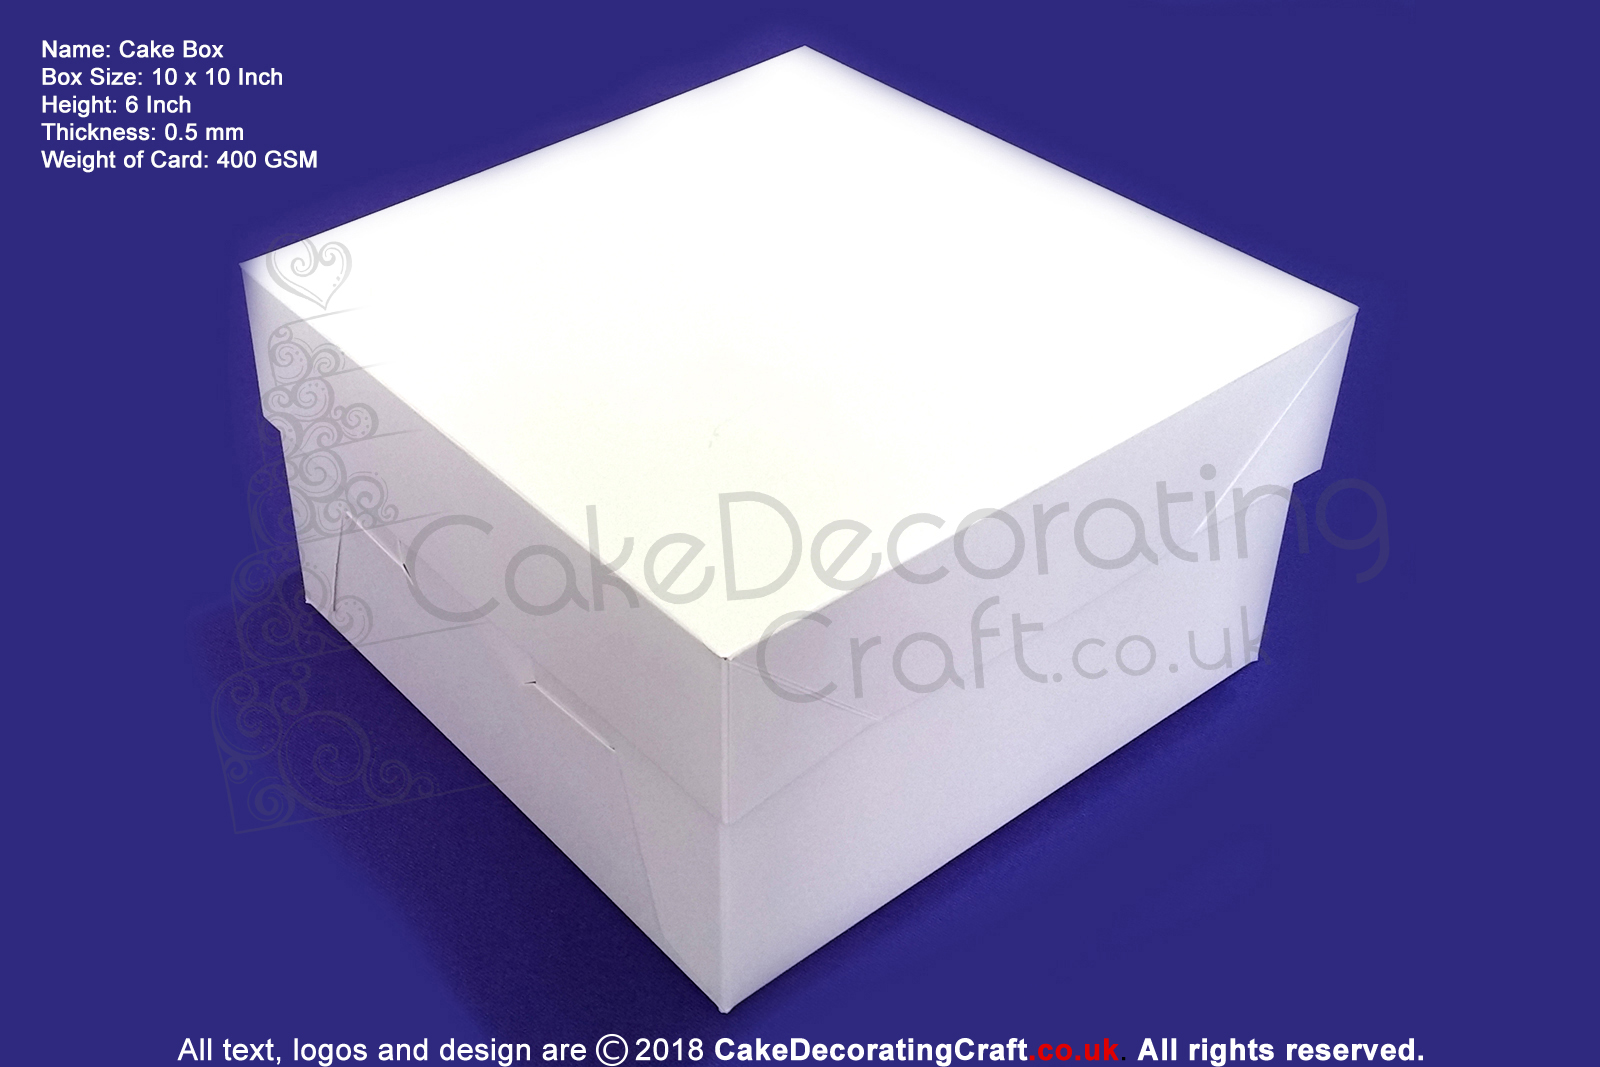 10" Inch | Cake Boxes + Lids | 0.5 mm Thick or 400 GSM | White | Strong | Premium Quality